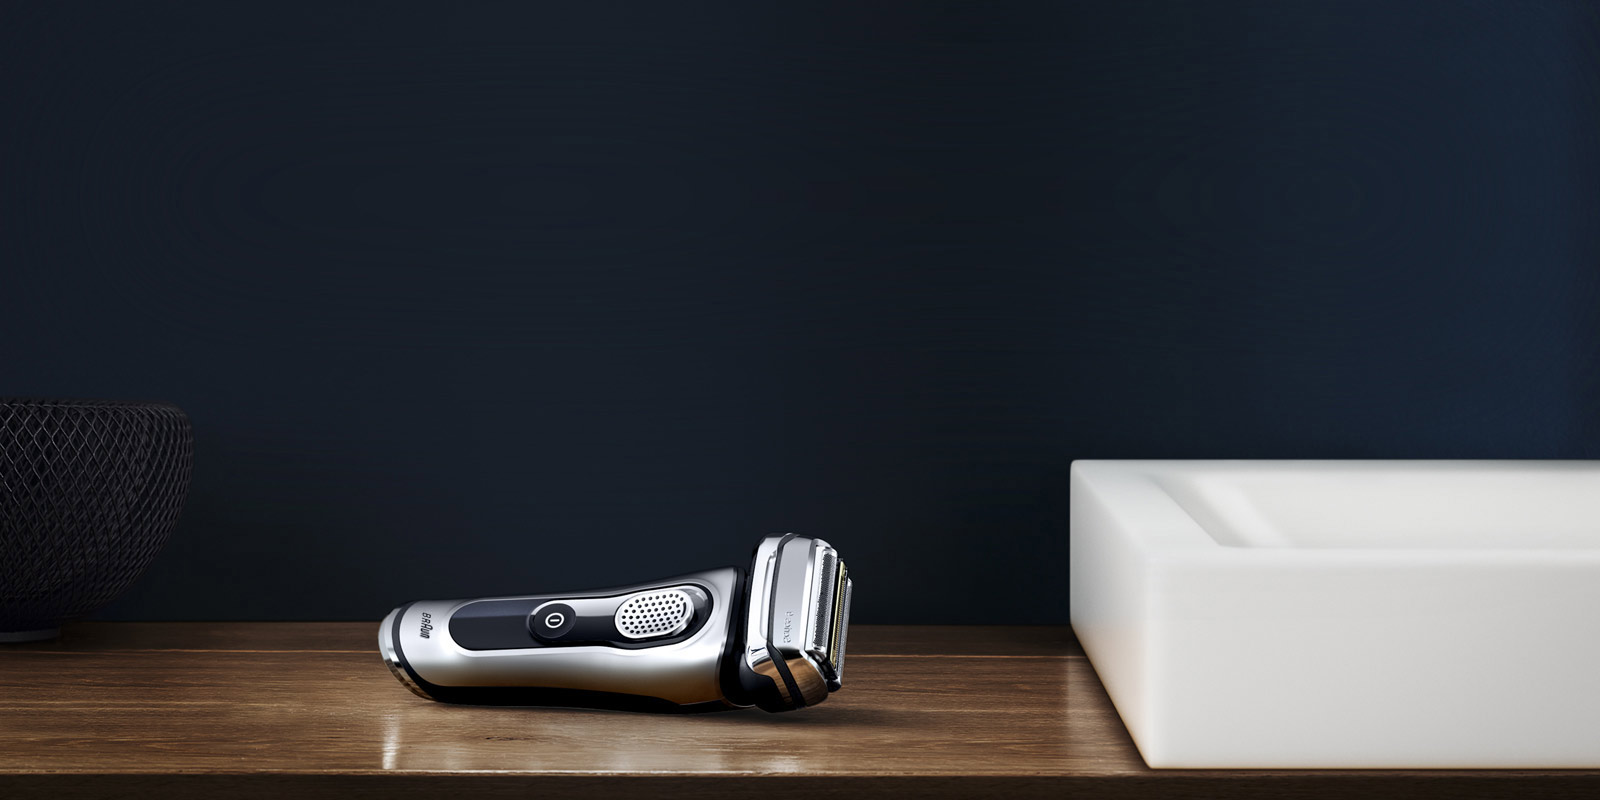 Smooth Shaving with Braun 320s-4 Series 3 Shaver